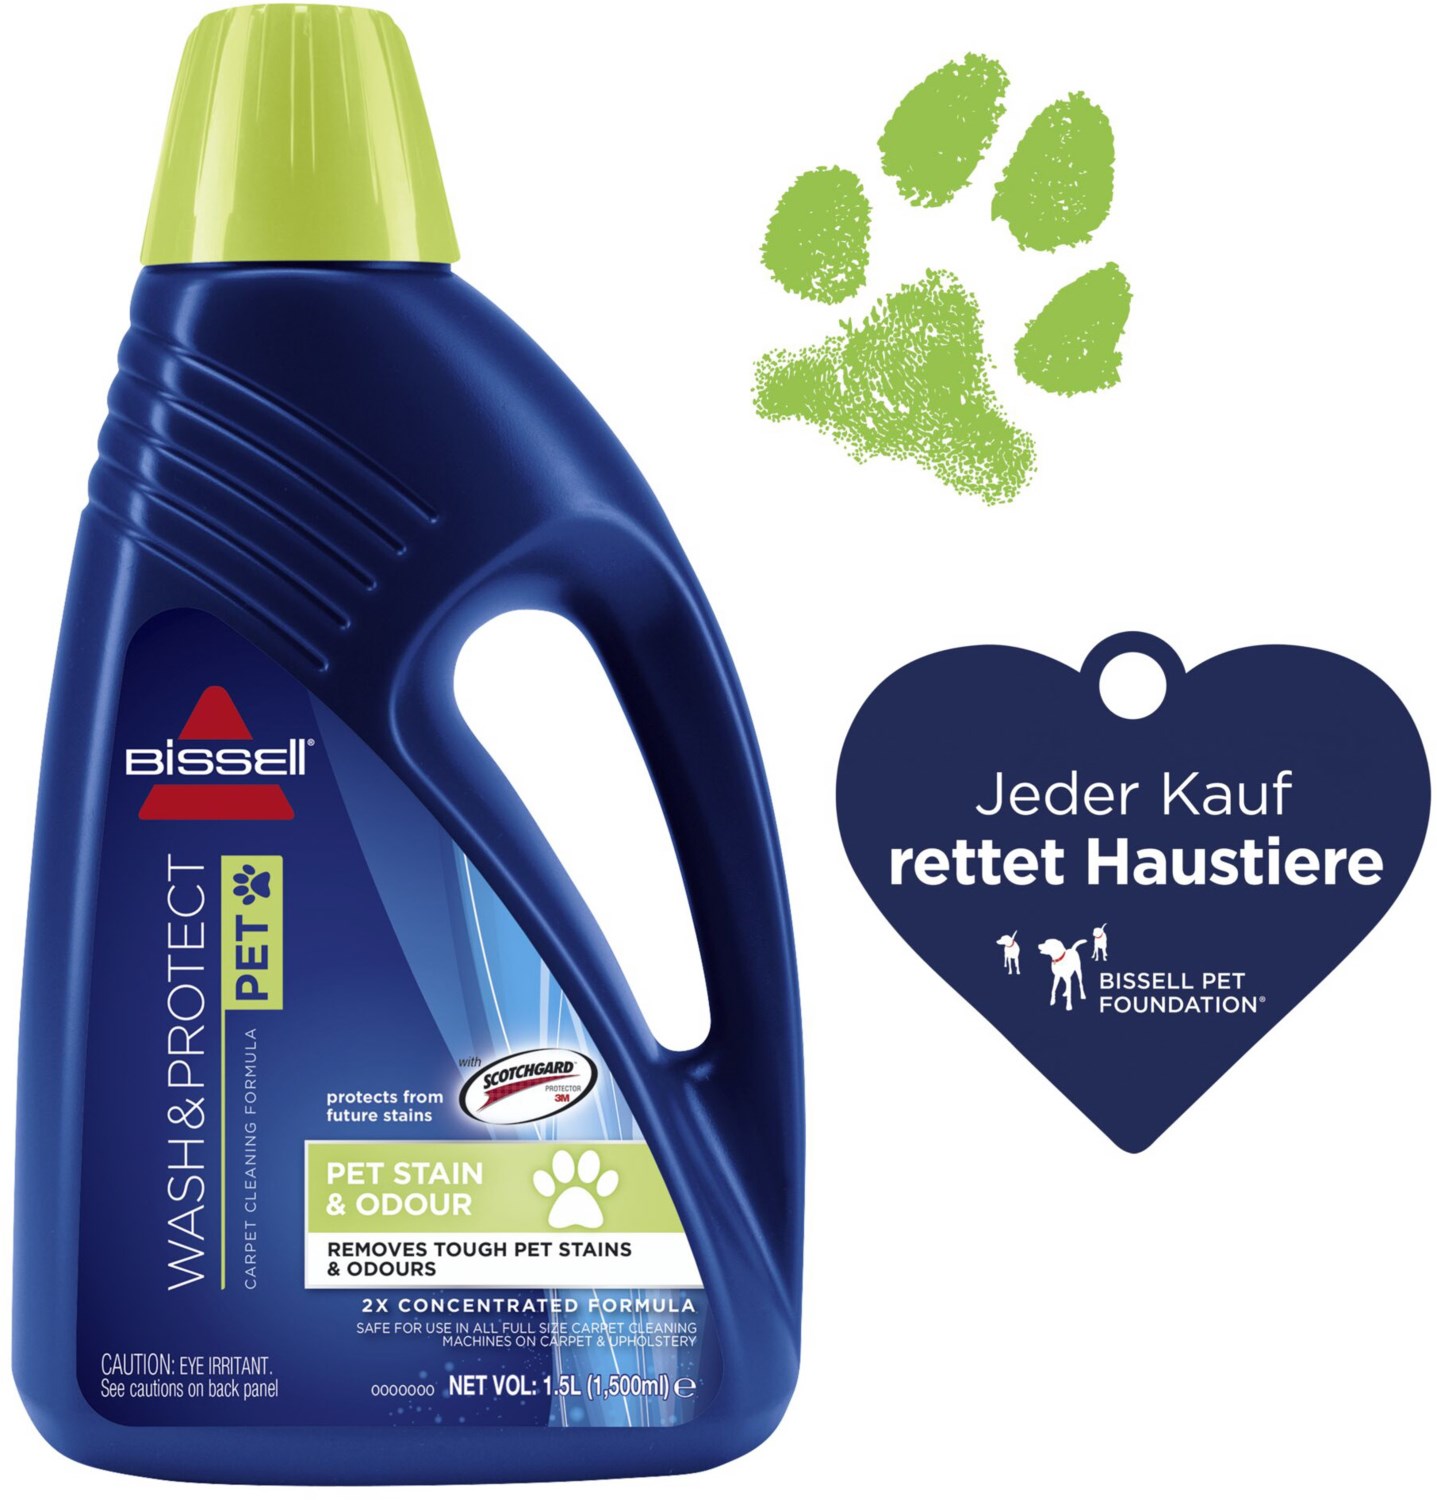 bissell 1087n wash & protect pet (1,5l) rei zubehÃ¶r